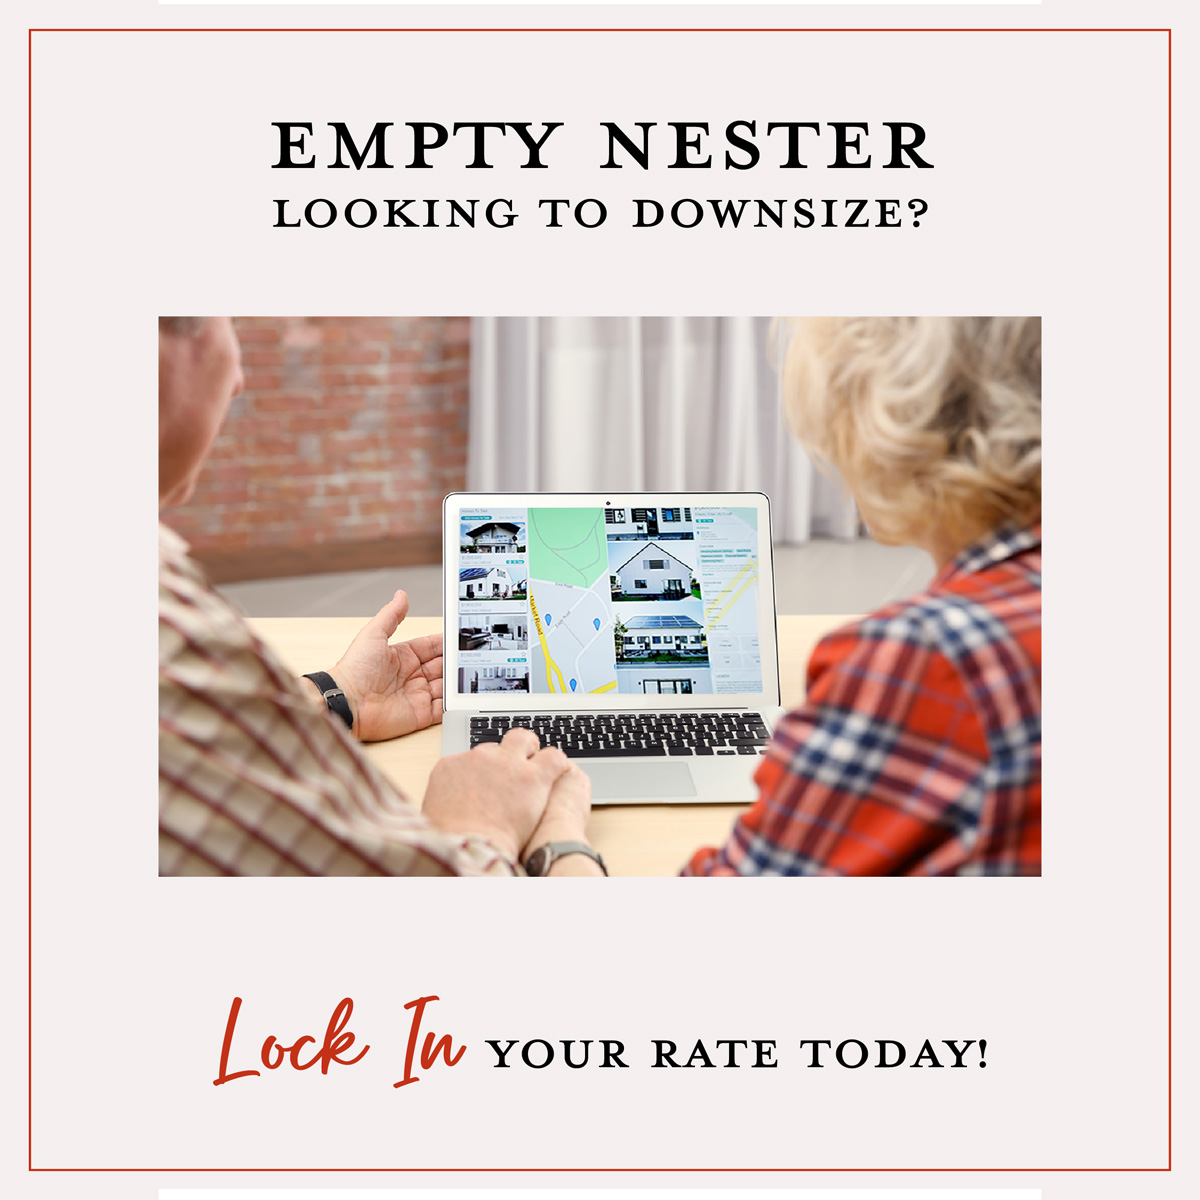 Looking to downsize now that the nest is empty? Remember, you can secure your rate while you search for your dream retirement spot. Let's chat and get you on your way to a cozy new home! 🏡 #downsizing #retirementgoals